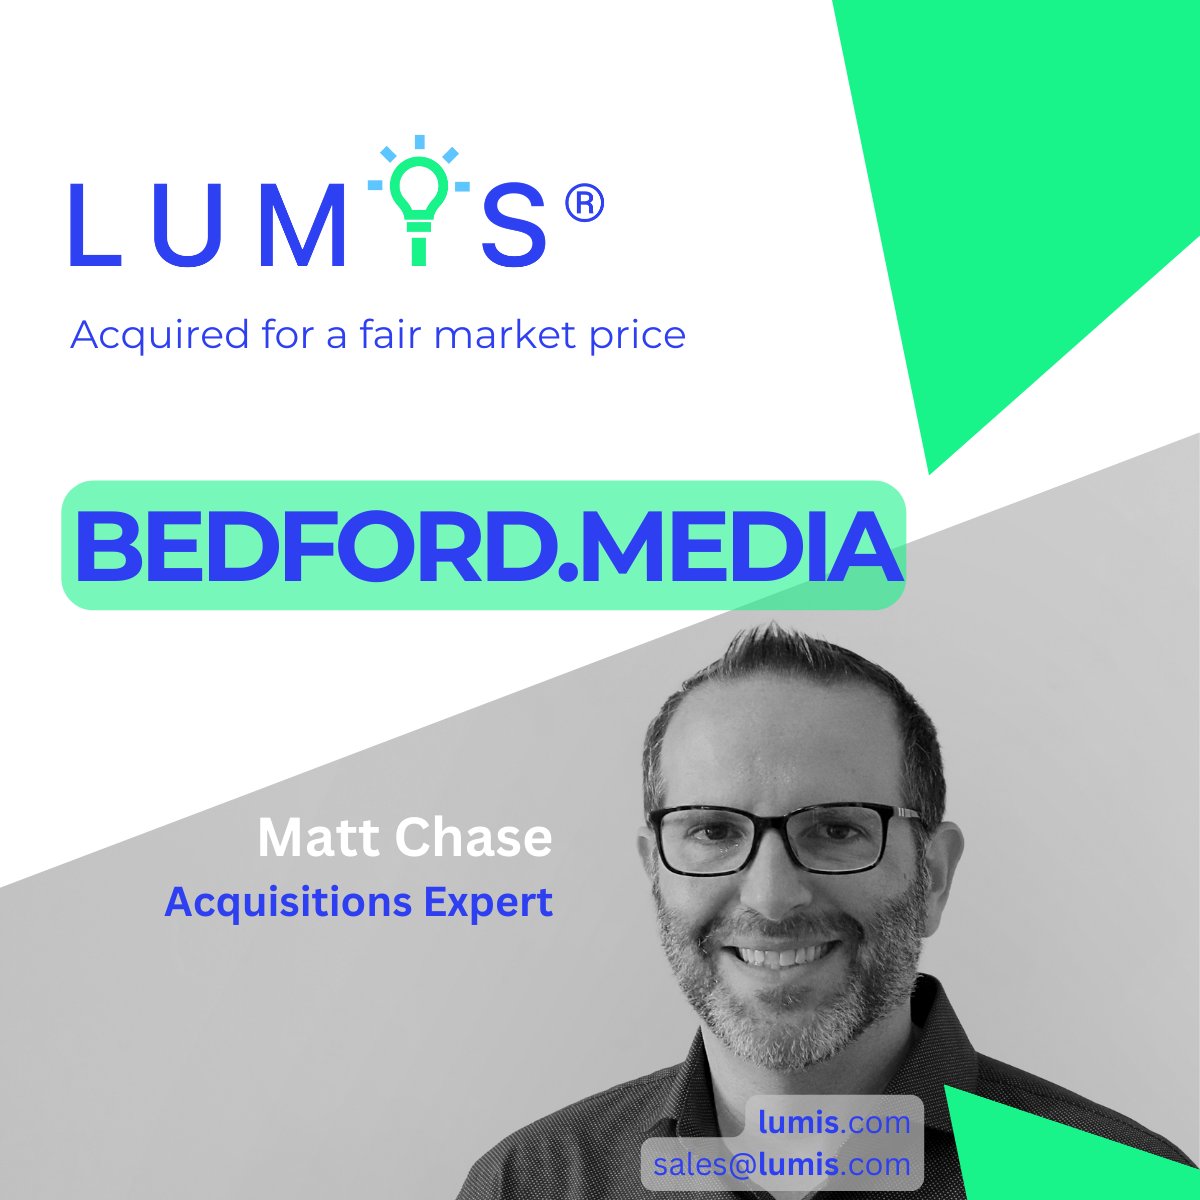 Bedford.media has been acquired!

#Lumis